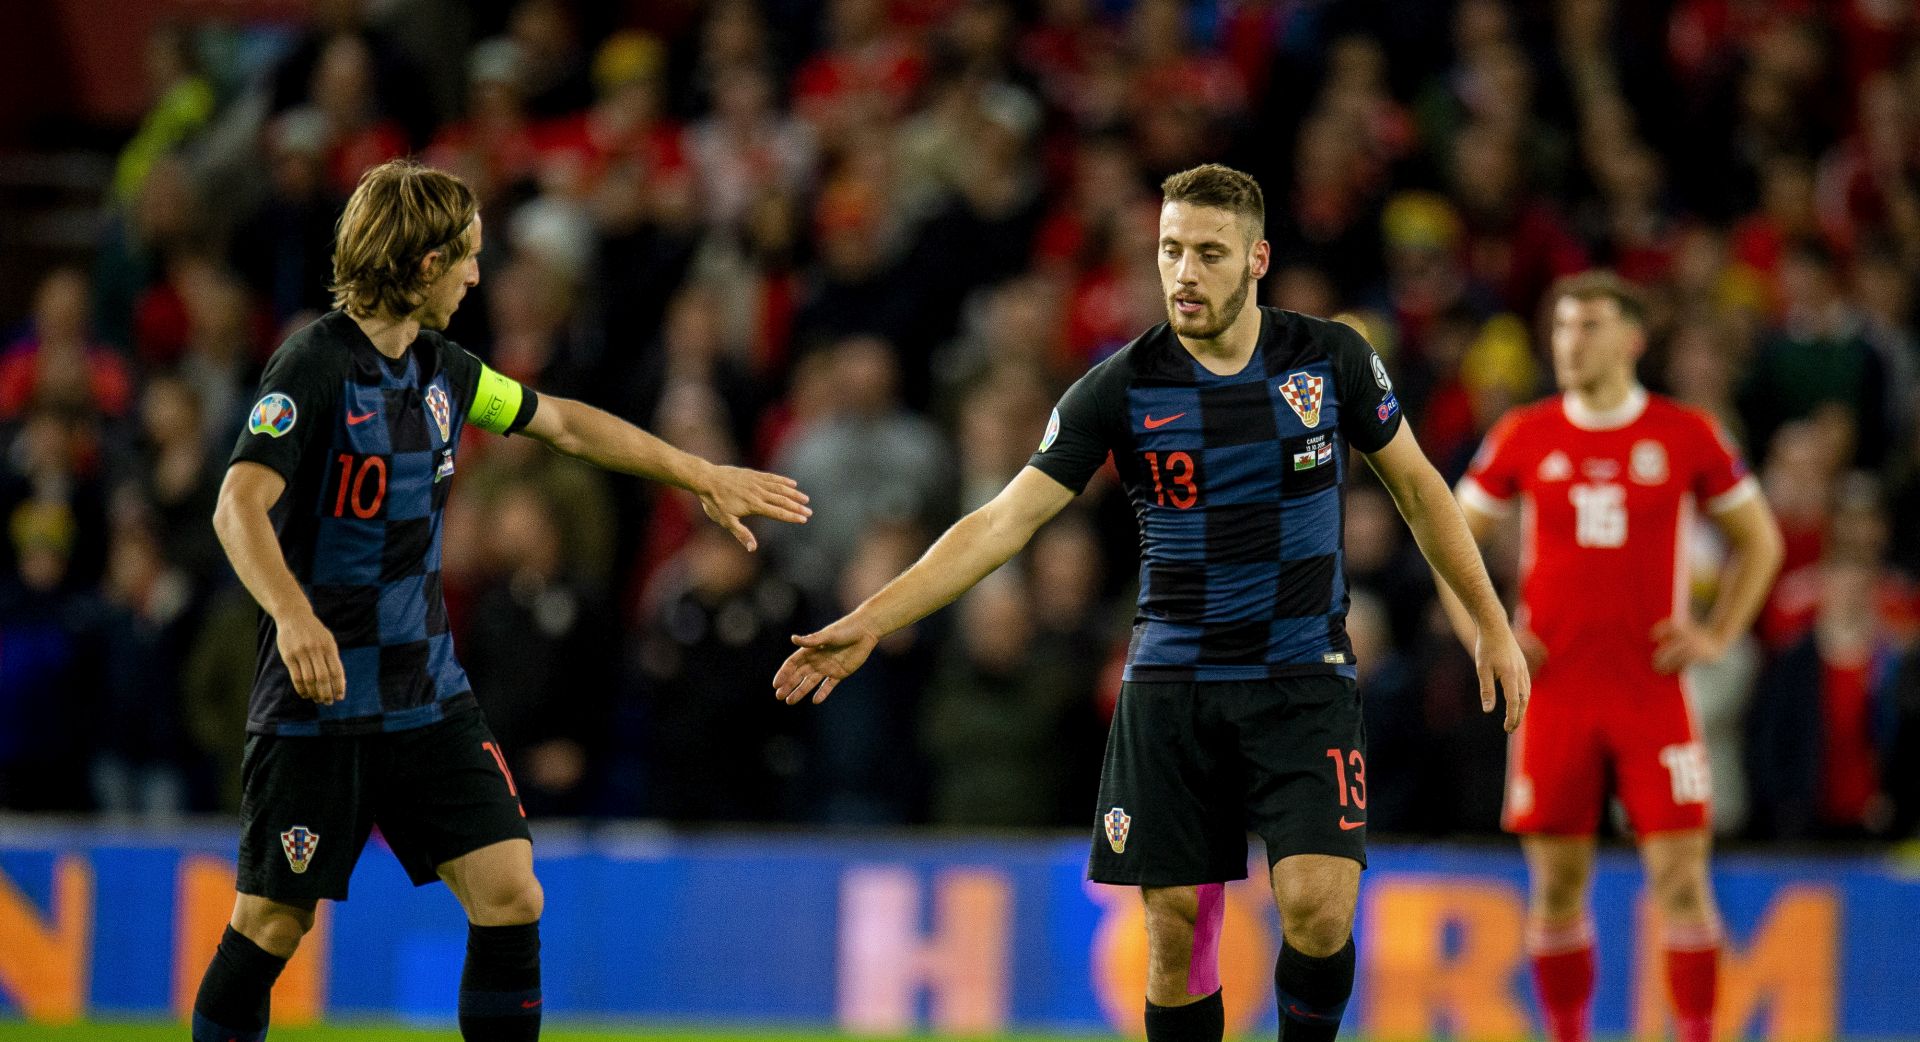 epa07918807 Croatia's Nikola Vlasic (R) celebrates with teammate Luka Modric after scoring the first goal during the UEFA EURO 2020 group E qualifier soccer match between Wales and Croatia held at Cardiff City Stadium in Wales, Britain, 13 October 2019.  EPA/PETER POWELL